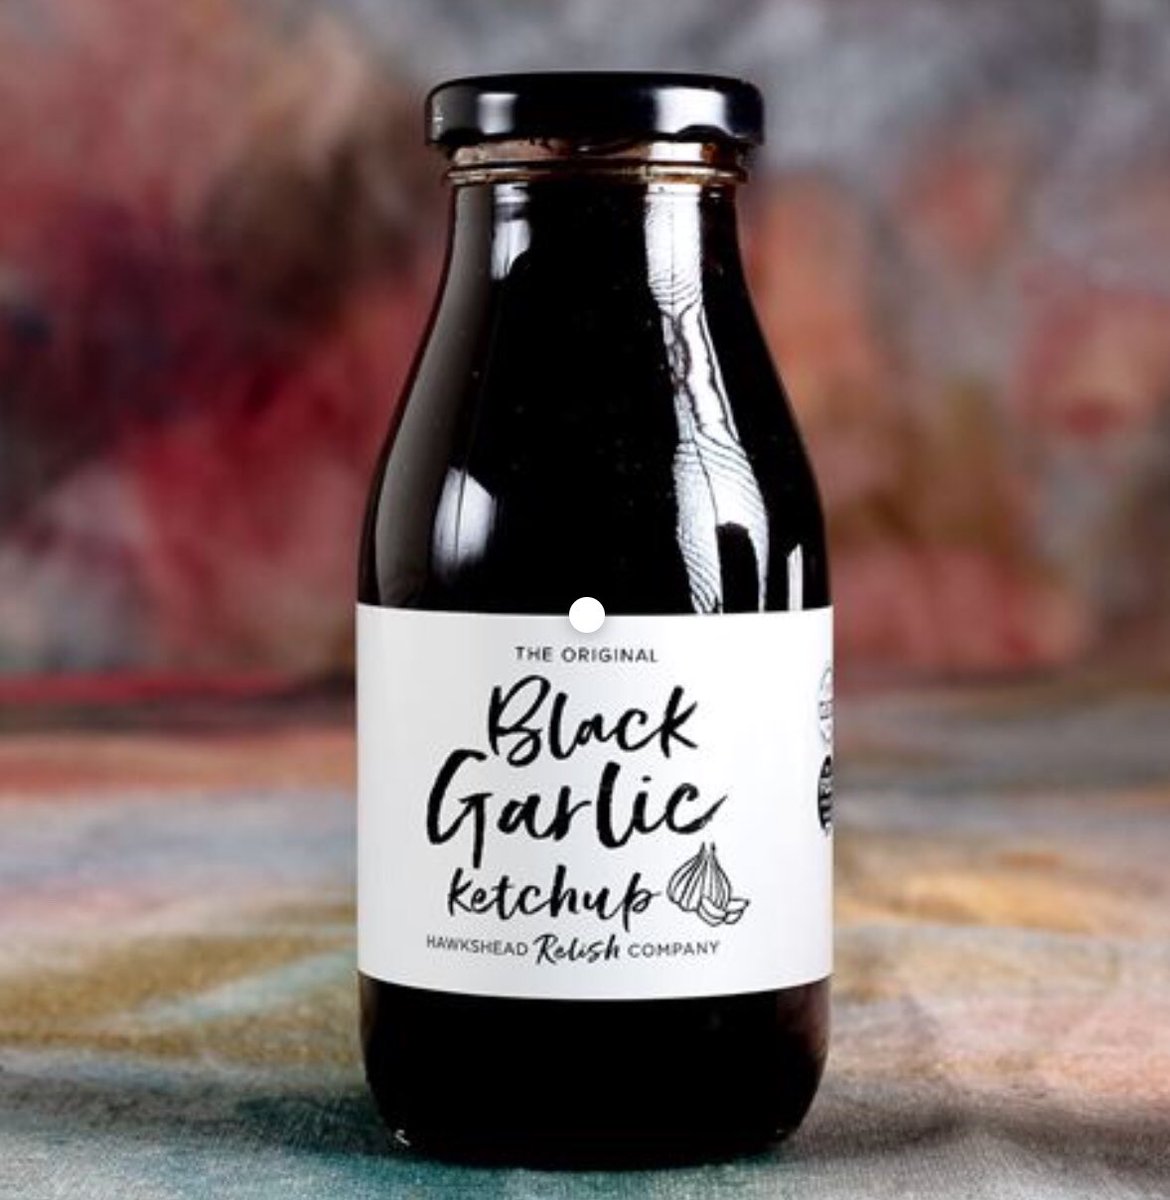 The legend of Black Garlic Ketchup has arrived 😱 You gotta try it! Delighted to now be stocking a range of @hawksheadrelish sauces & chutneys 😄 #blackgarlicketchup #blackgarlic #hawksheadrelishblackgarlicketchup #hawksheadrelish #sirloinsteak #steakdinner #steak #thomasons